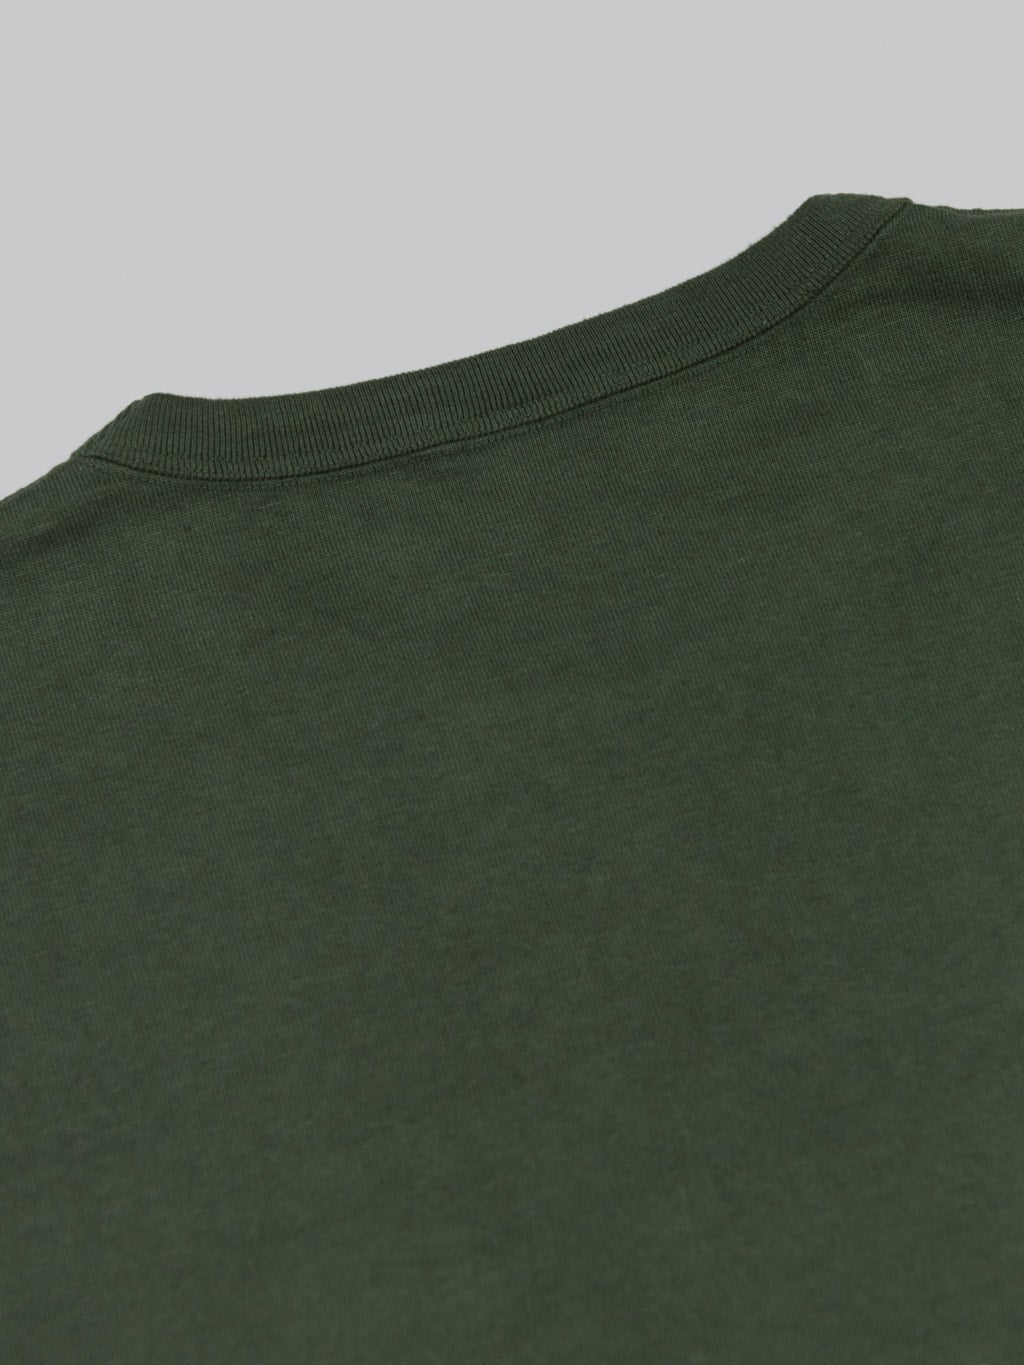 trophy clothing od henley tee olive cotton fabric